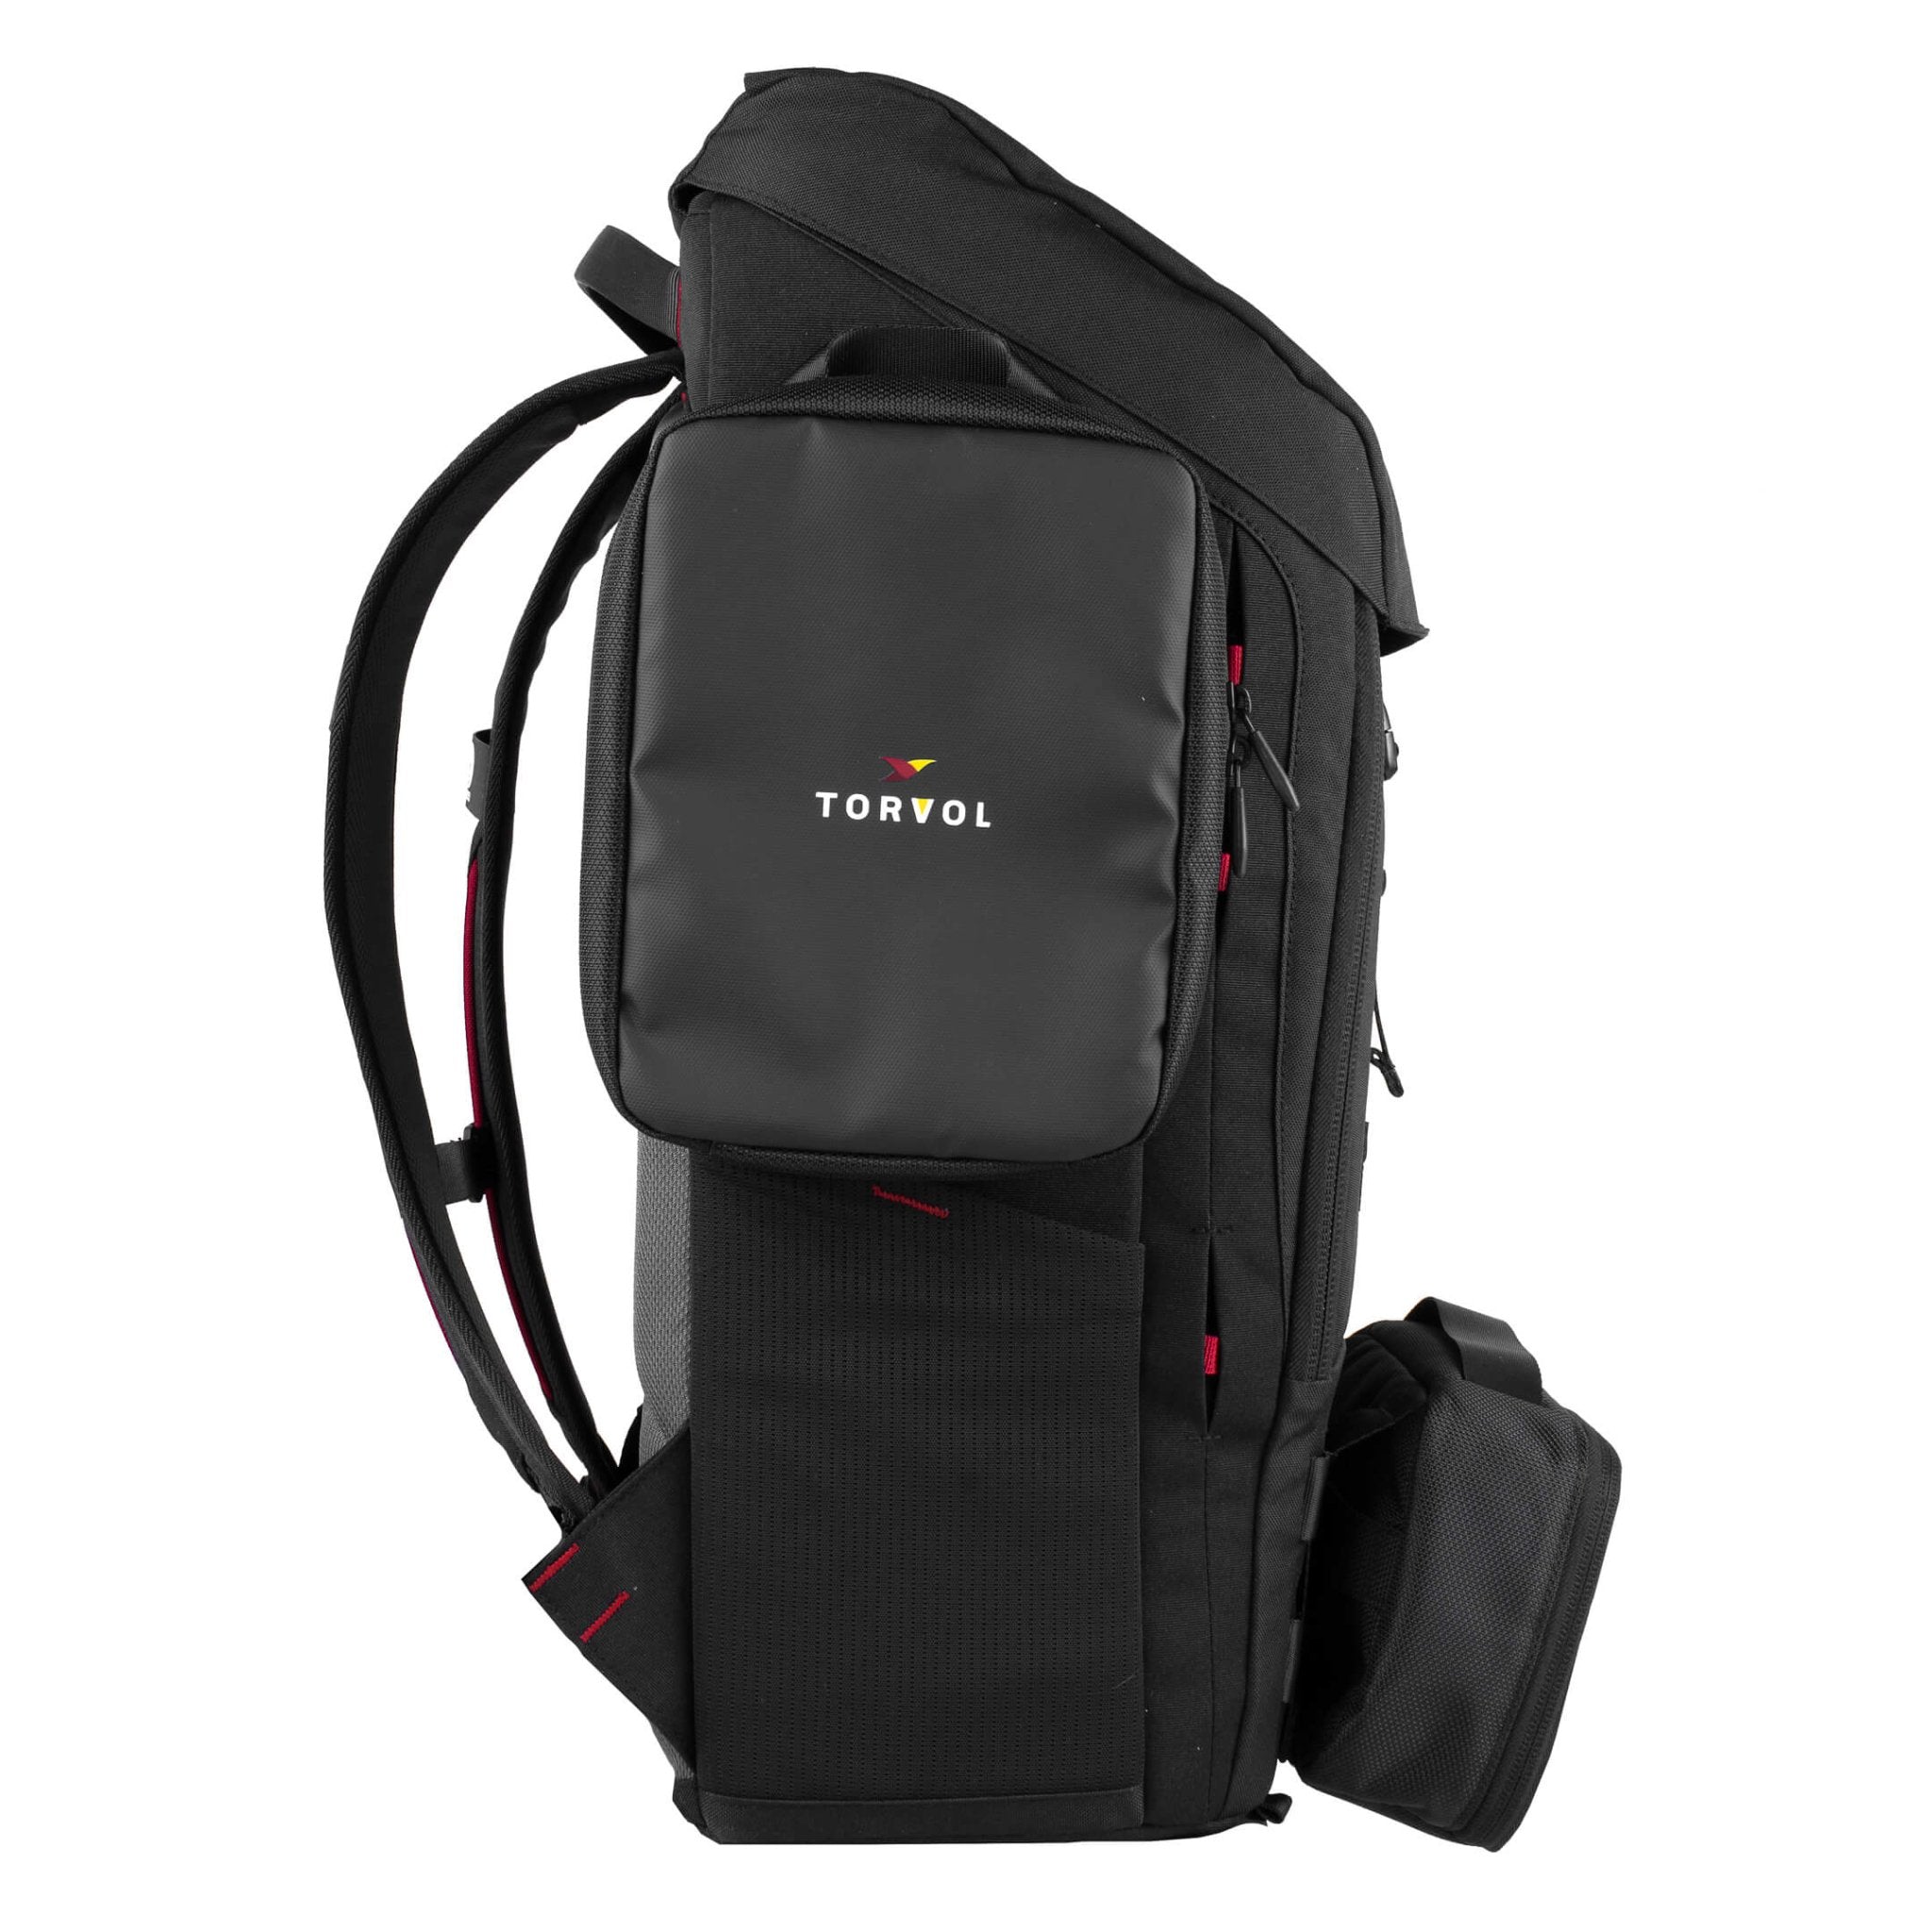 Torvol Urban Carrier Backpack - Your All-Round Freestyle Backpack 5 - Torvol - Drone Authority